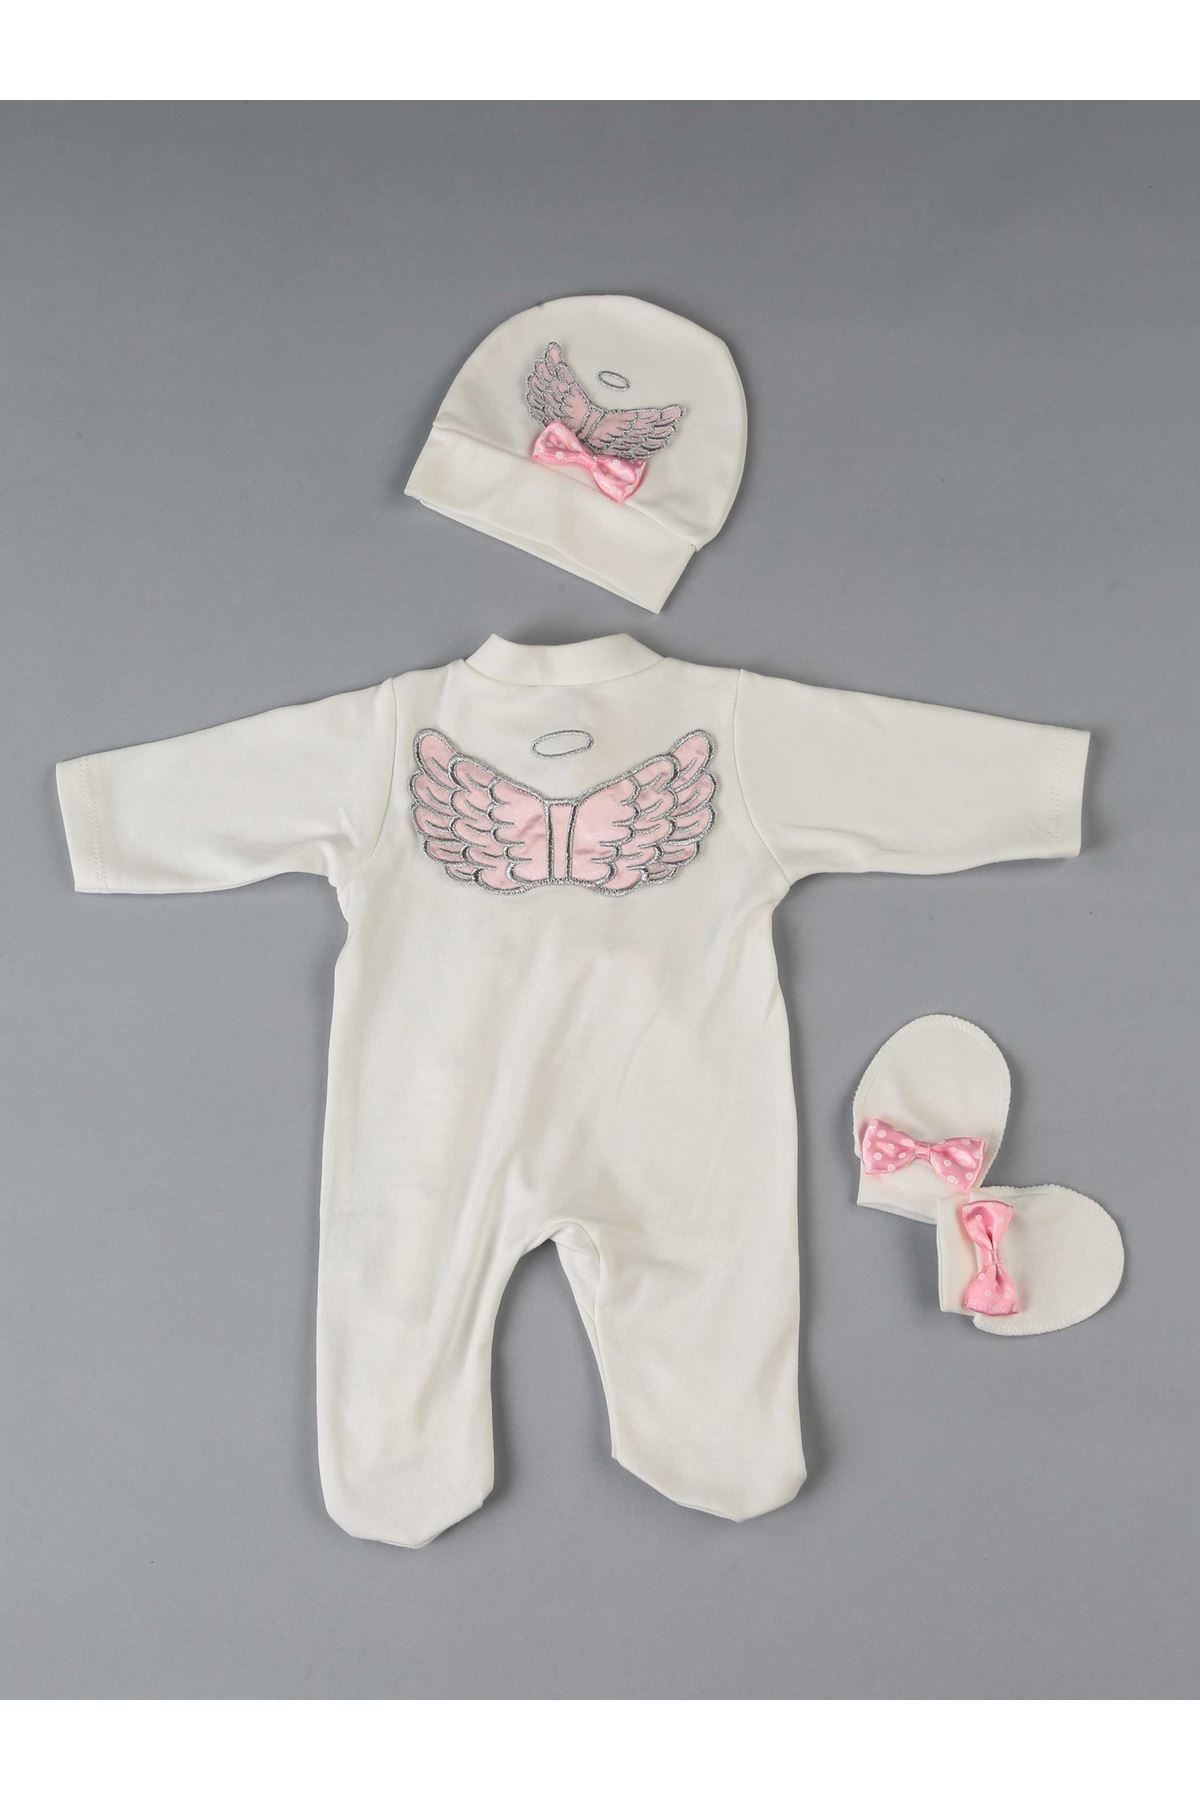 Baby Girl Rompers Suit Pink Angel Wing 3 Pieces Newborn Outfit Cotton High Quality Girls Babies Clothes Princess Model